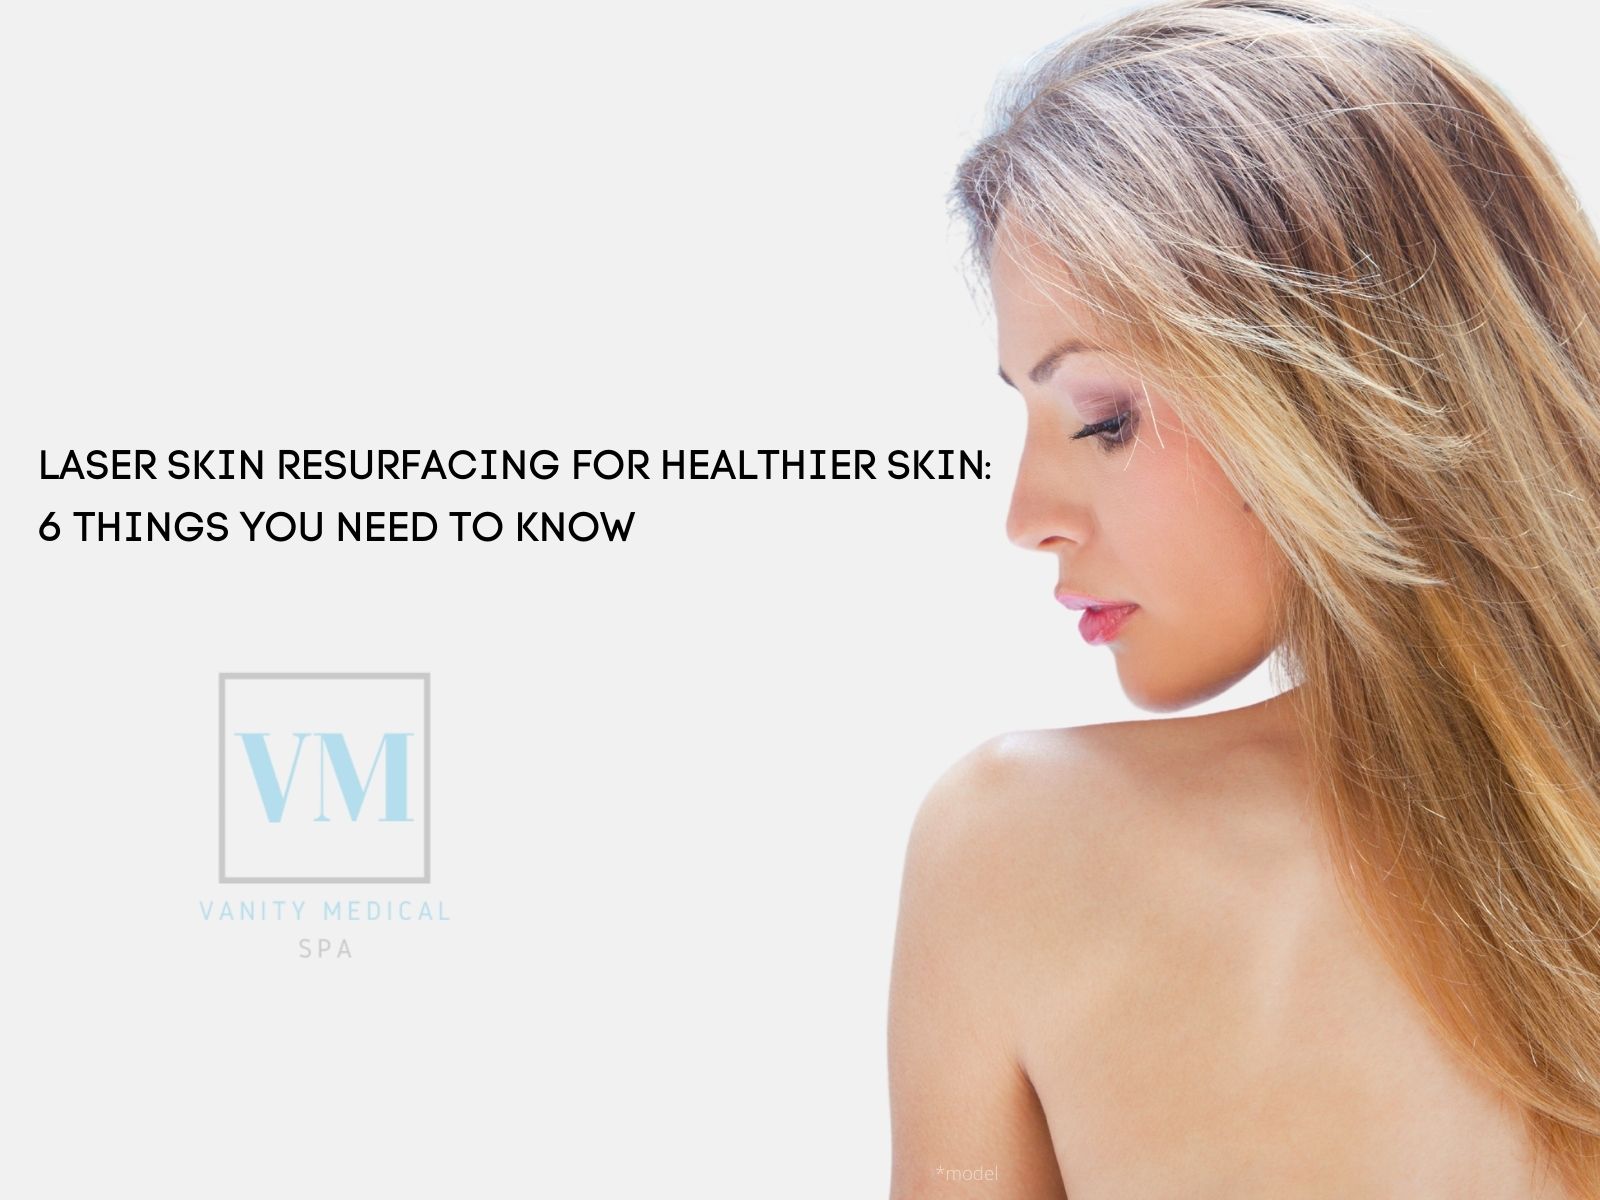 Laser Skin Resurfacing For Healthier Skin: 6 Things You Need To Know